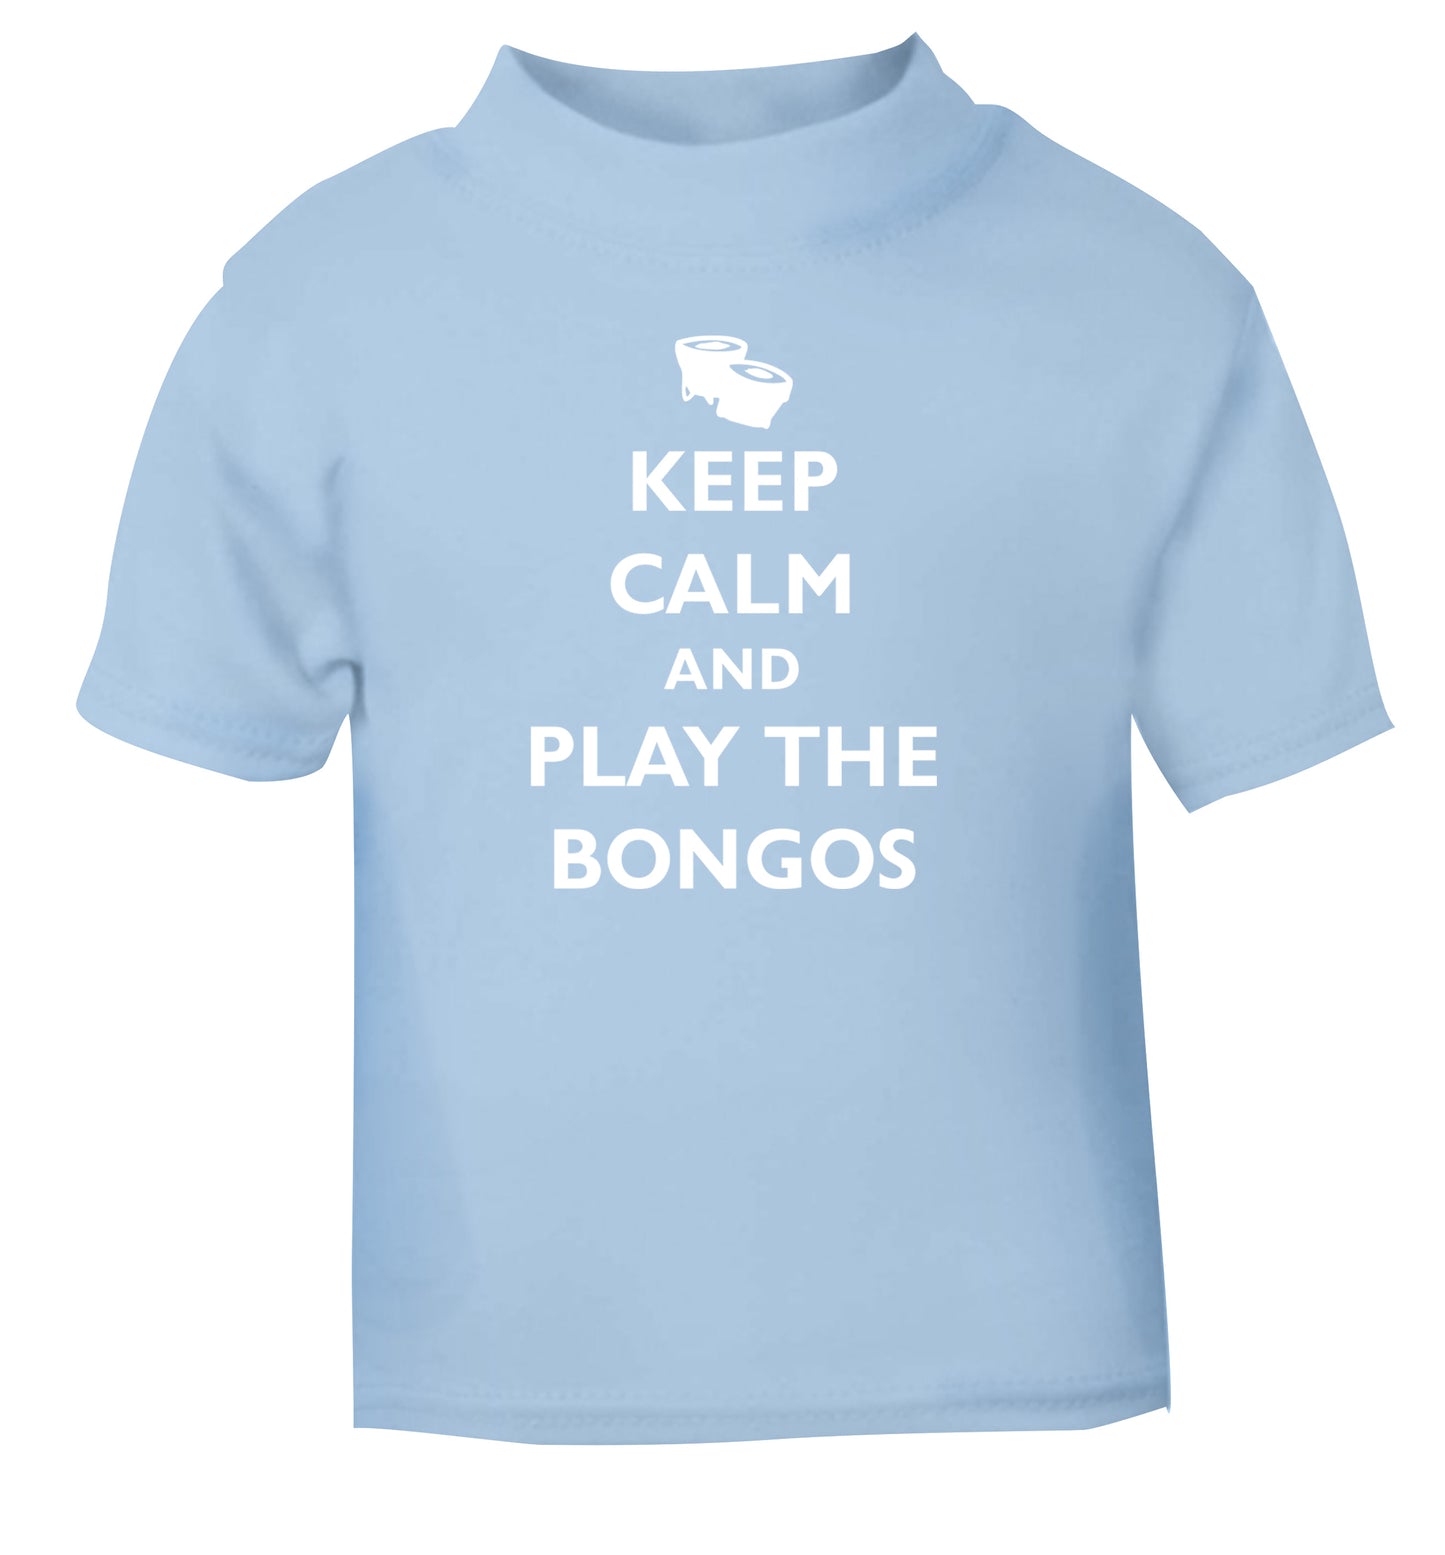 Keep calm and play the bongos light blue Baby Toddler Tshirt 2 Years